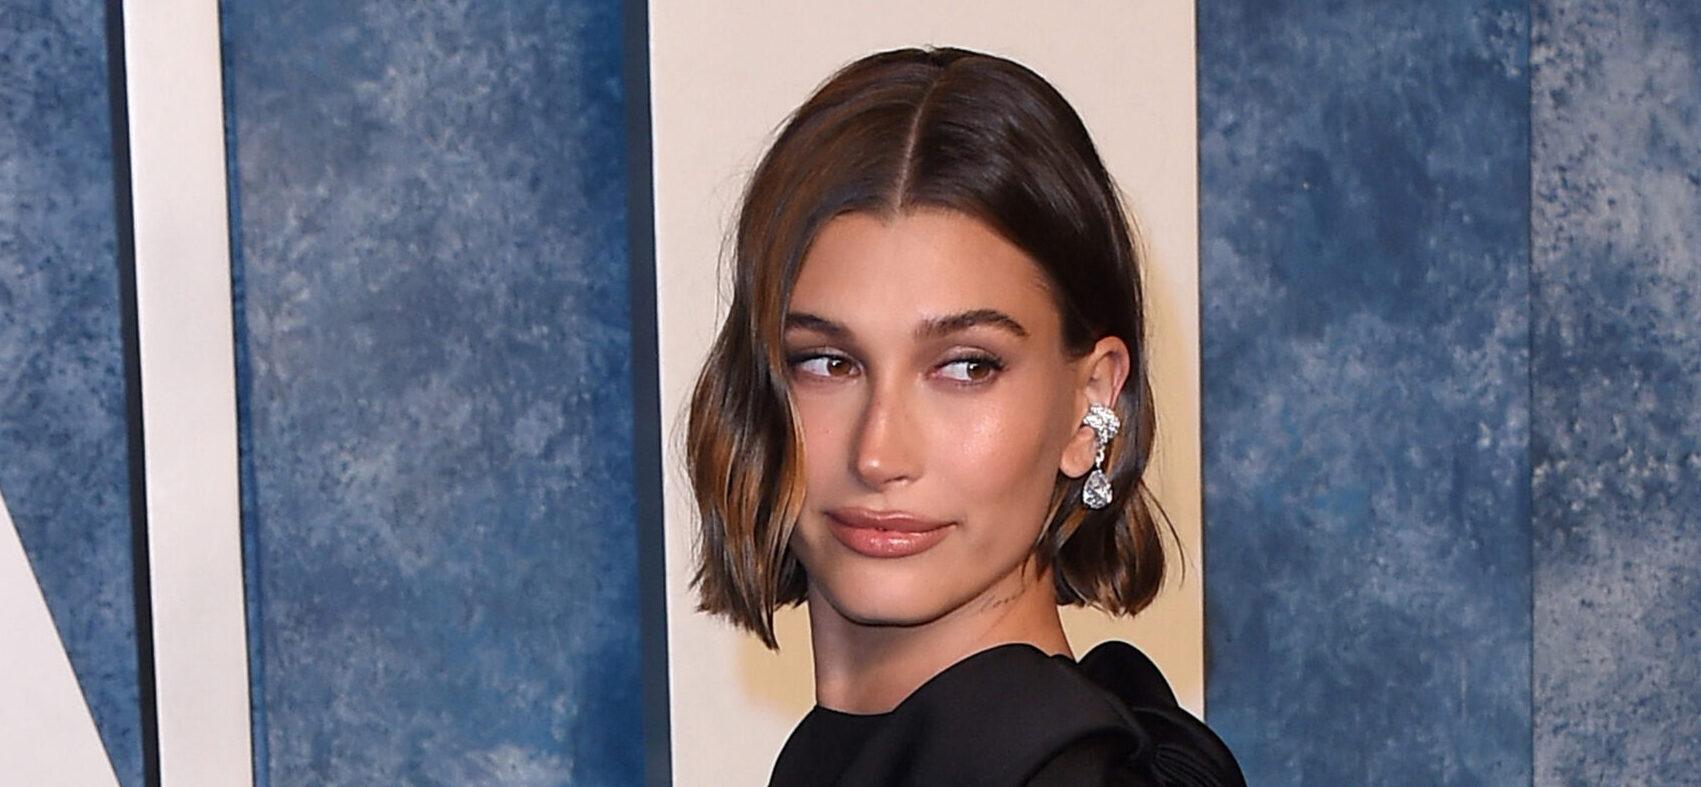 Hailey Bieber Shuts Down Pregnancy Rumors With Stunning Ab-Baring Snaps